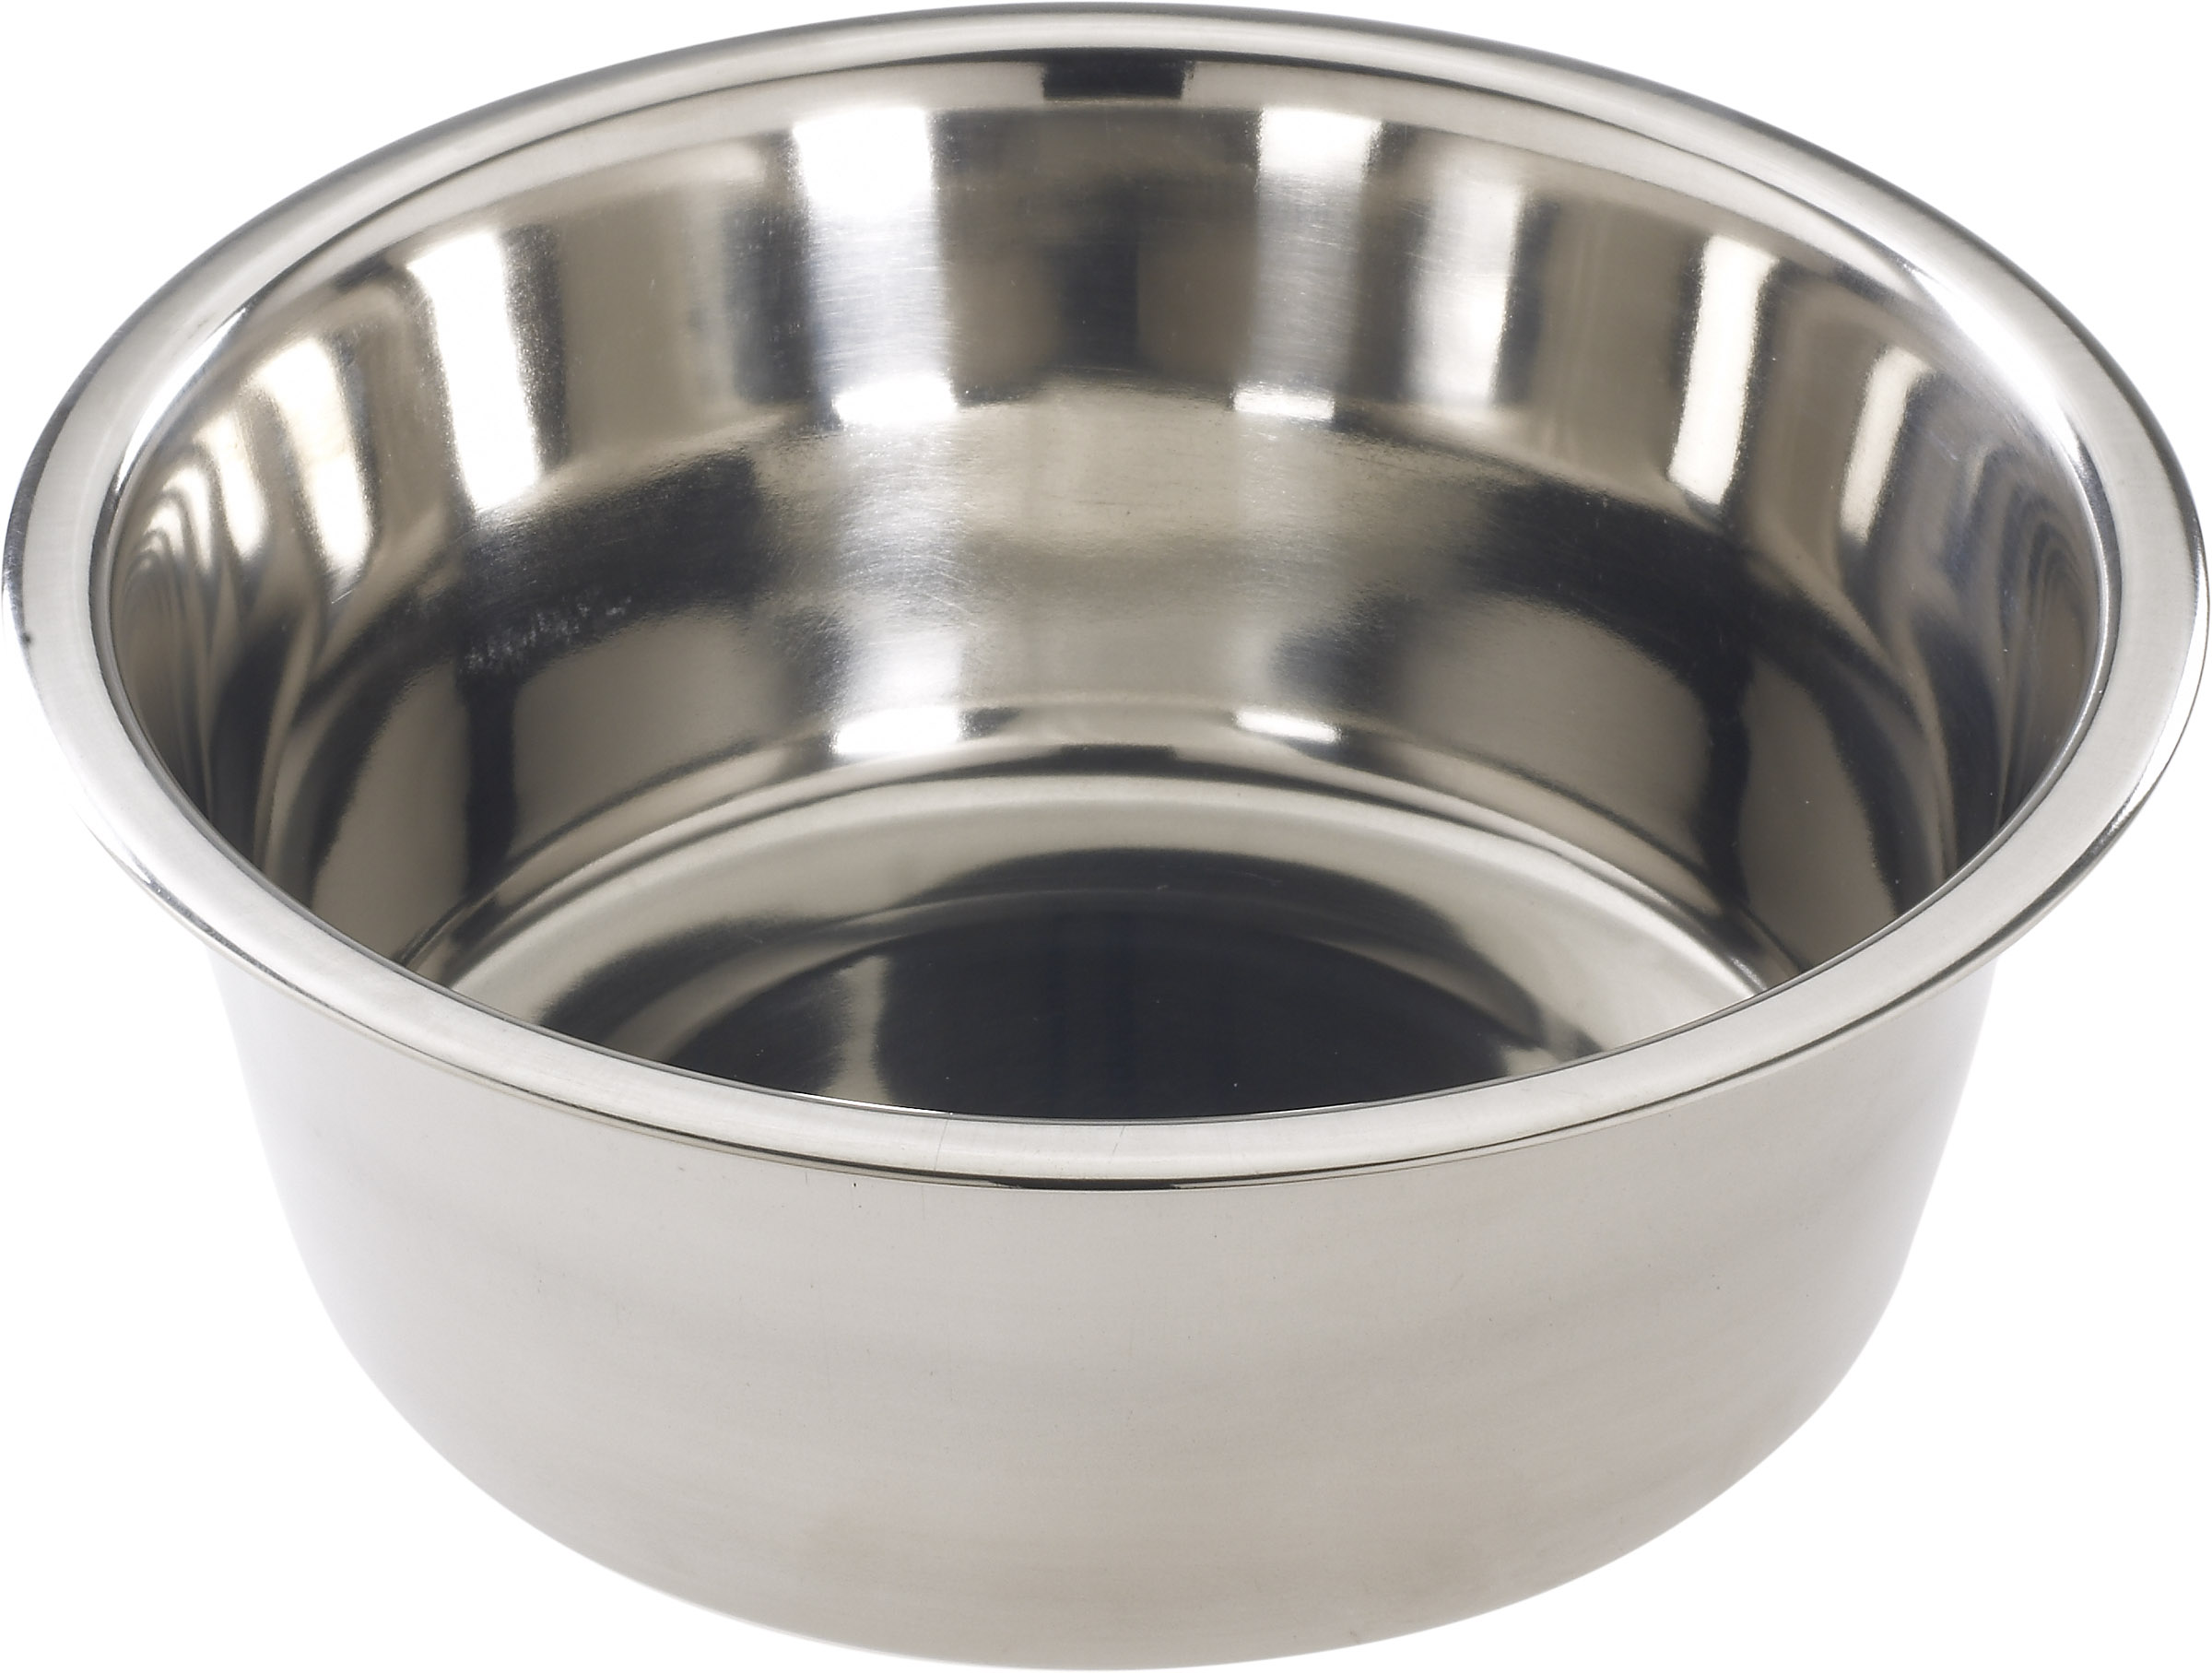 Stainless Steel Dish, 2 qt.